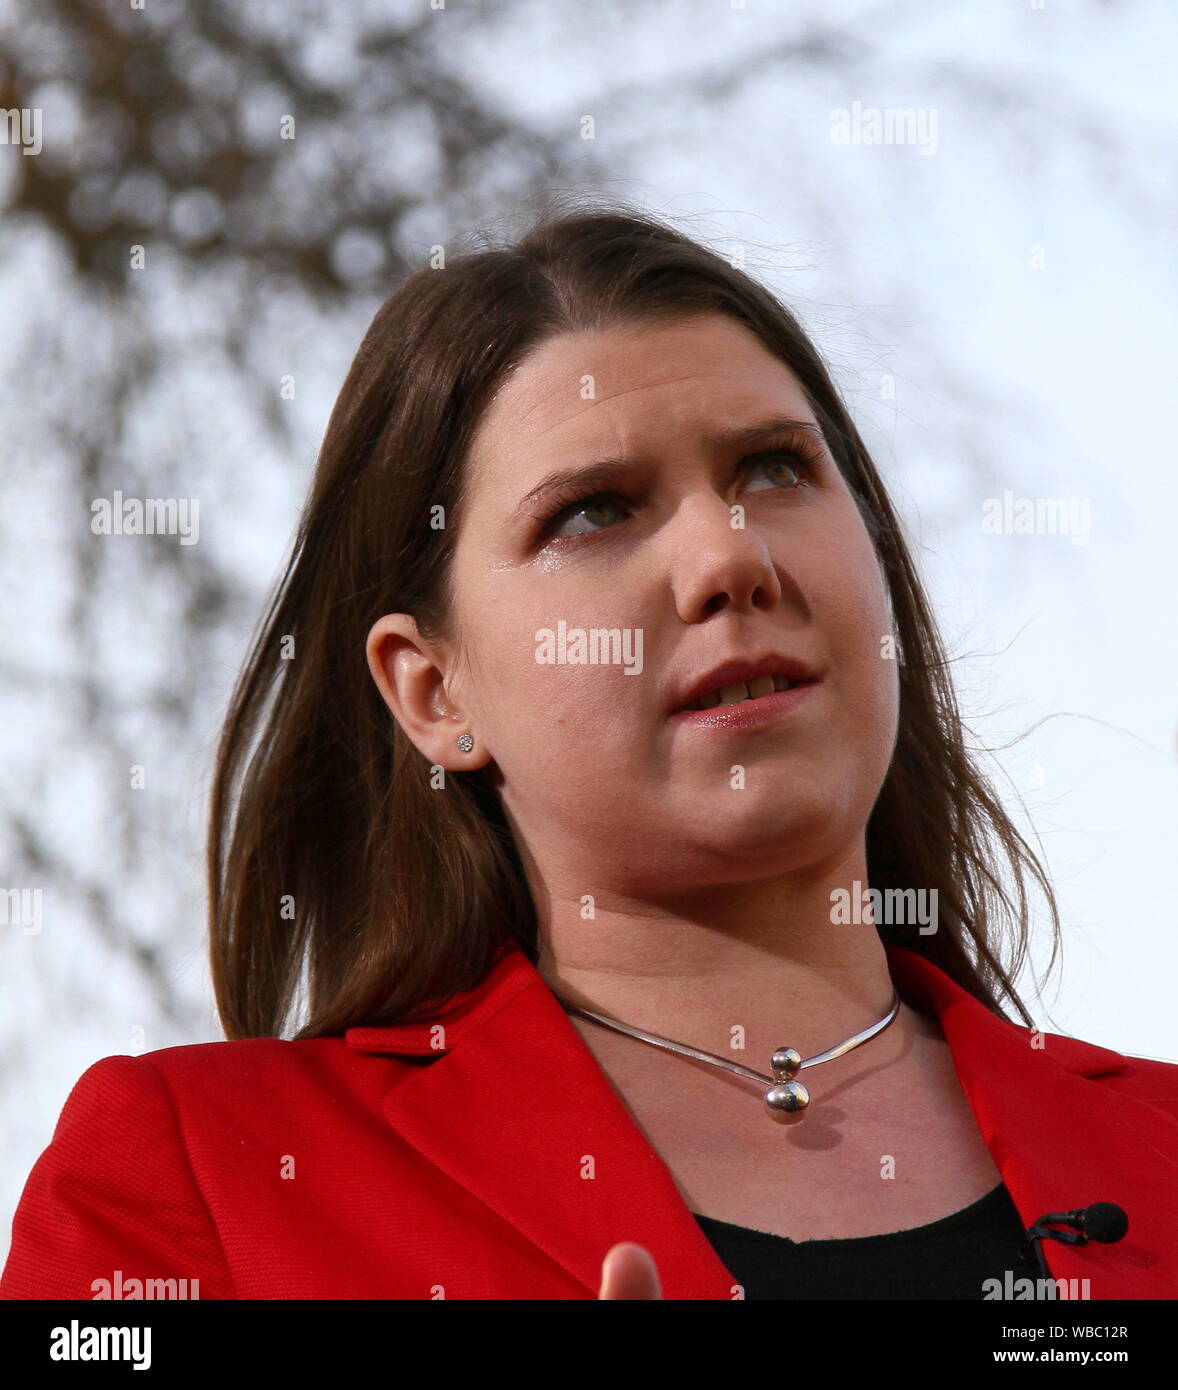 JO SWINSON  MP LEADER OF THE LIBERAL DEMOCRAT PARTY. BRITISH POLITICIANS. UK POLITICIANS. UK POLITICS. POLITICS. LIB DEMS. MP FOR EAST DUMBARTONSHIRE. YOUNGEST AND FIRTS WOMAN TO HOLD THE POSITION OF LIBERAL DEMOCRAT PARTY LEADER. Stock Photo